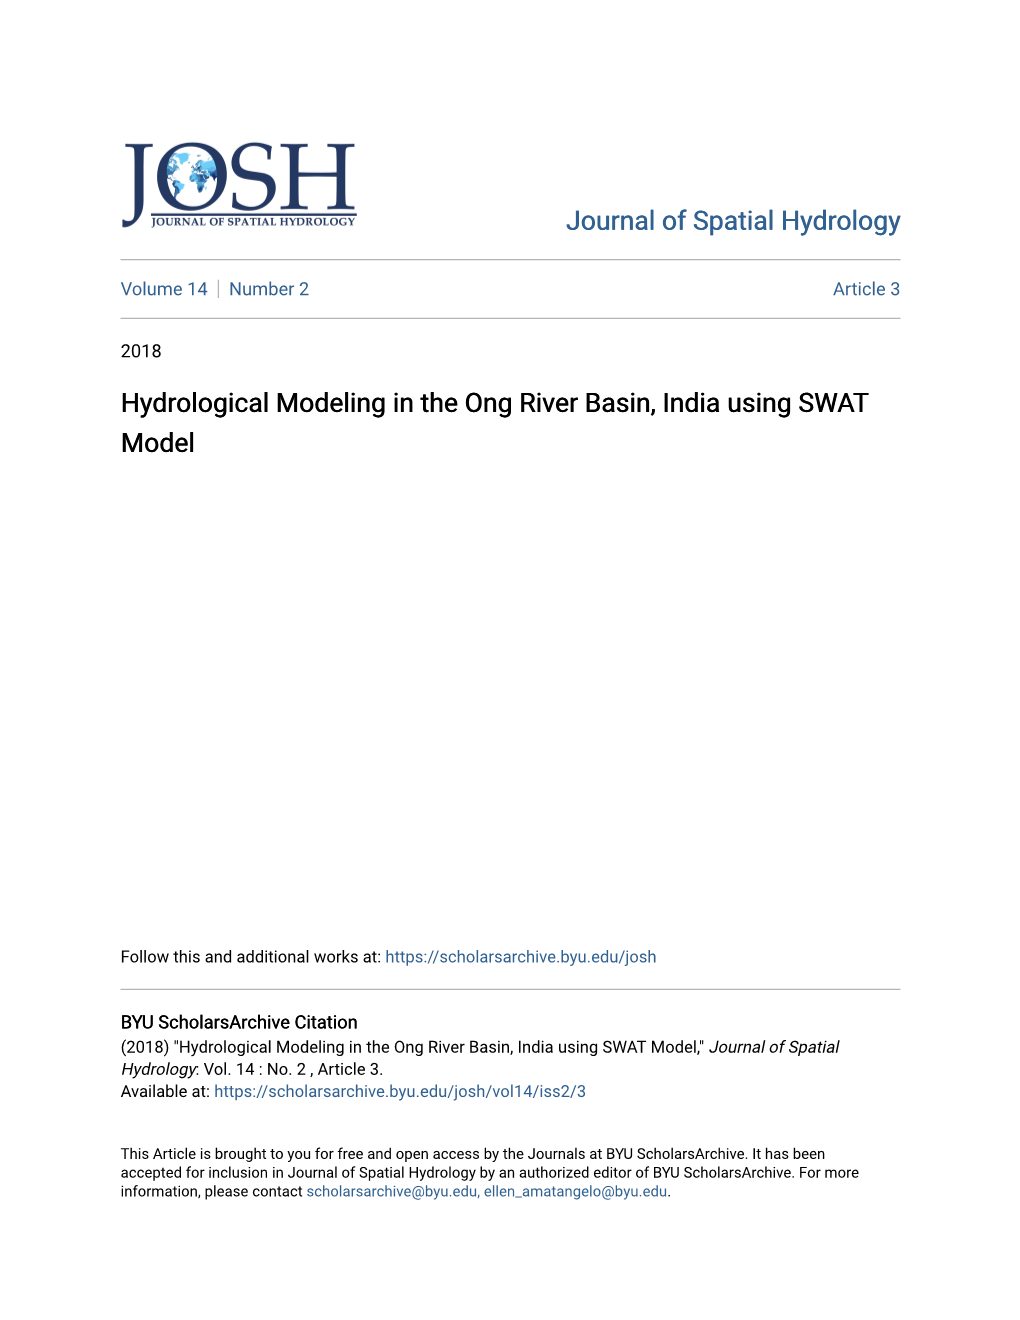 Hydrological Modeling in the Ong River Basin, India Using SWAT Model